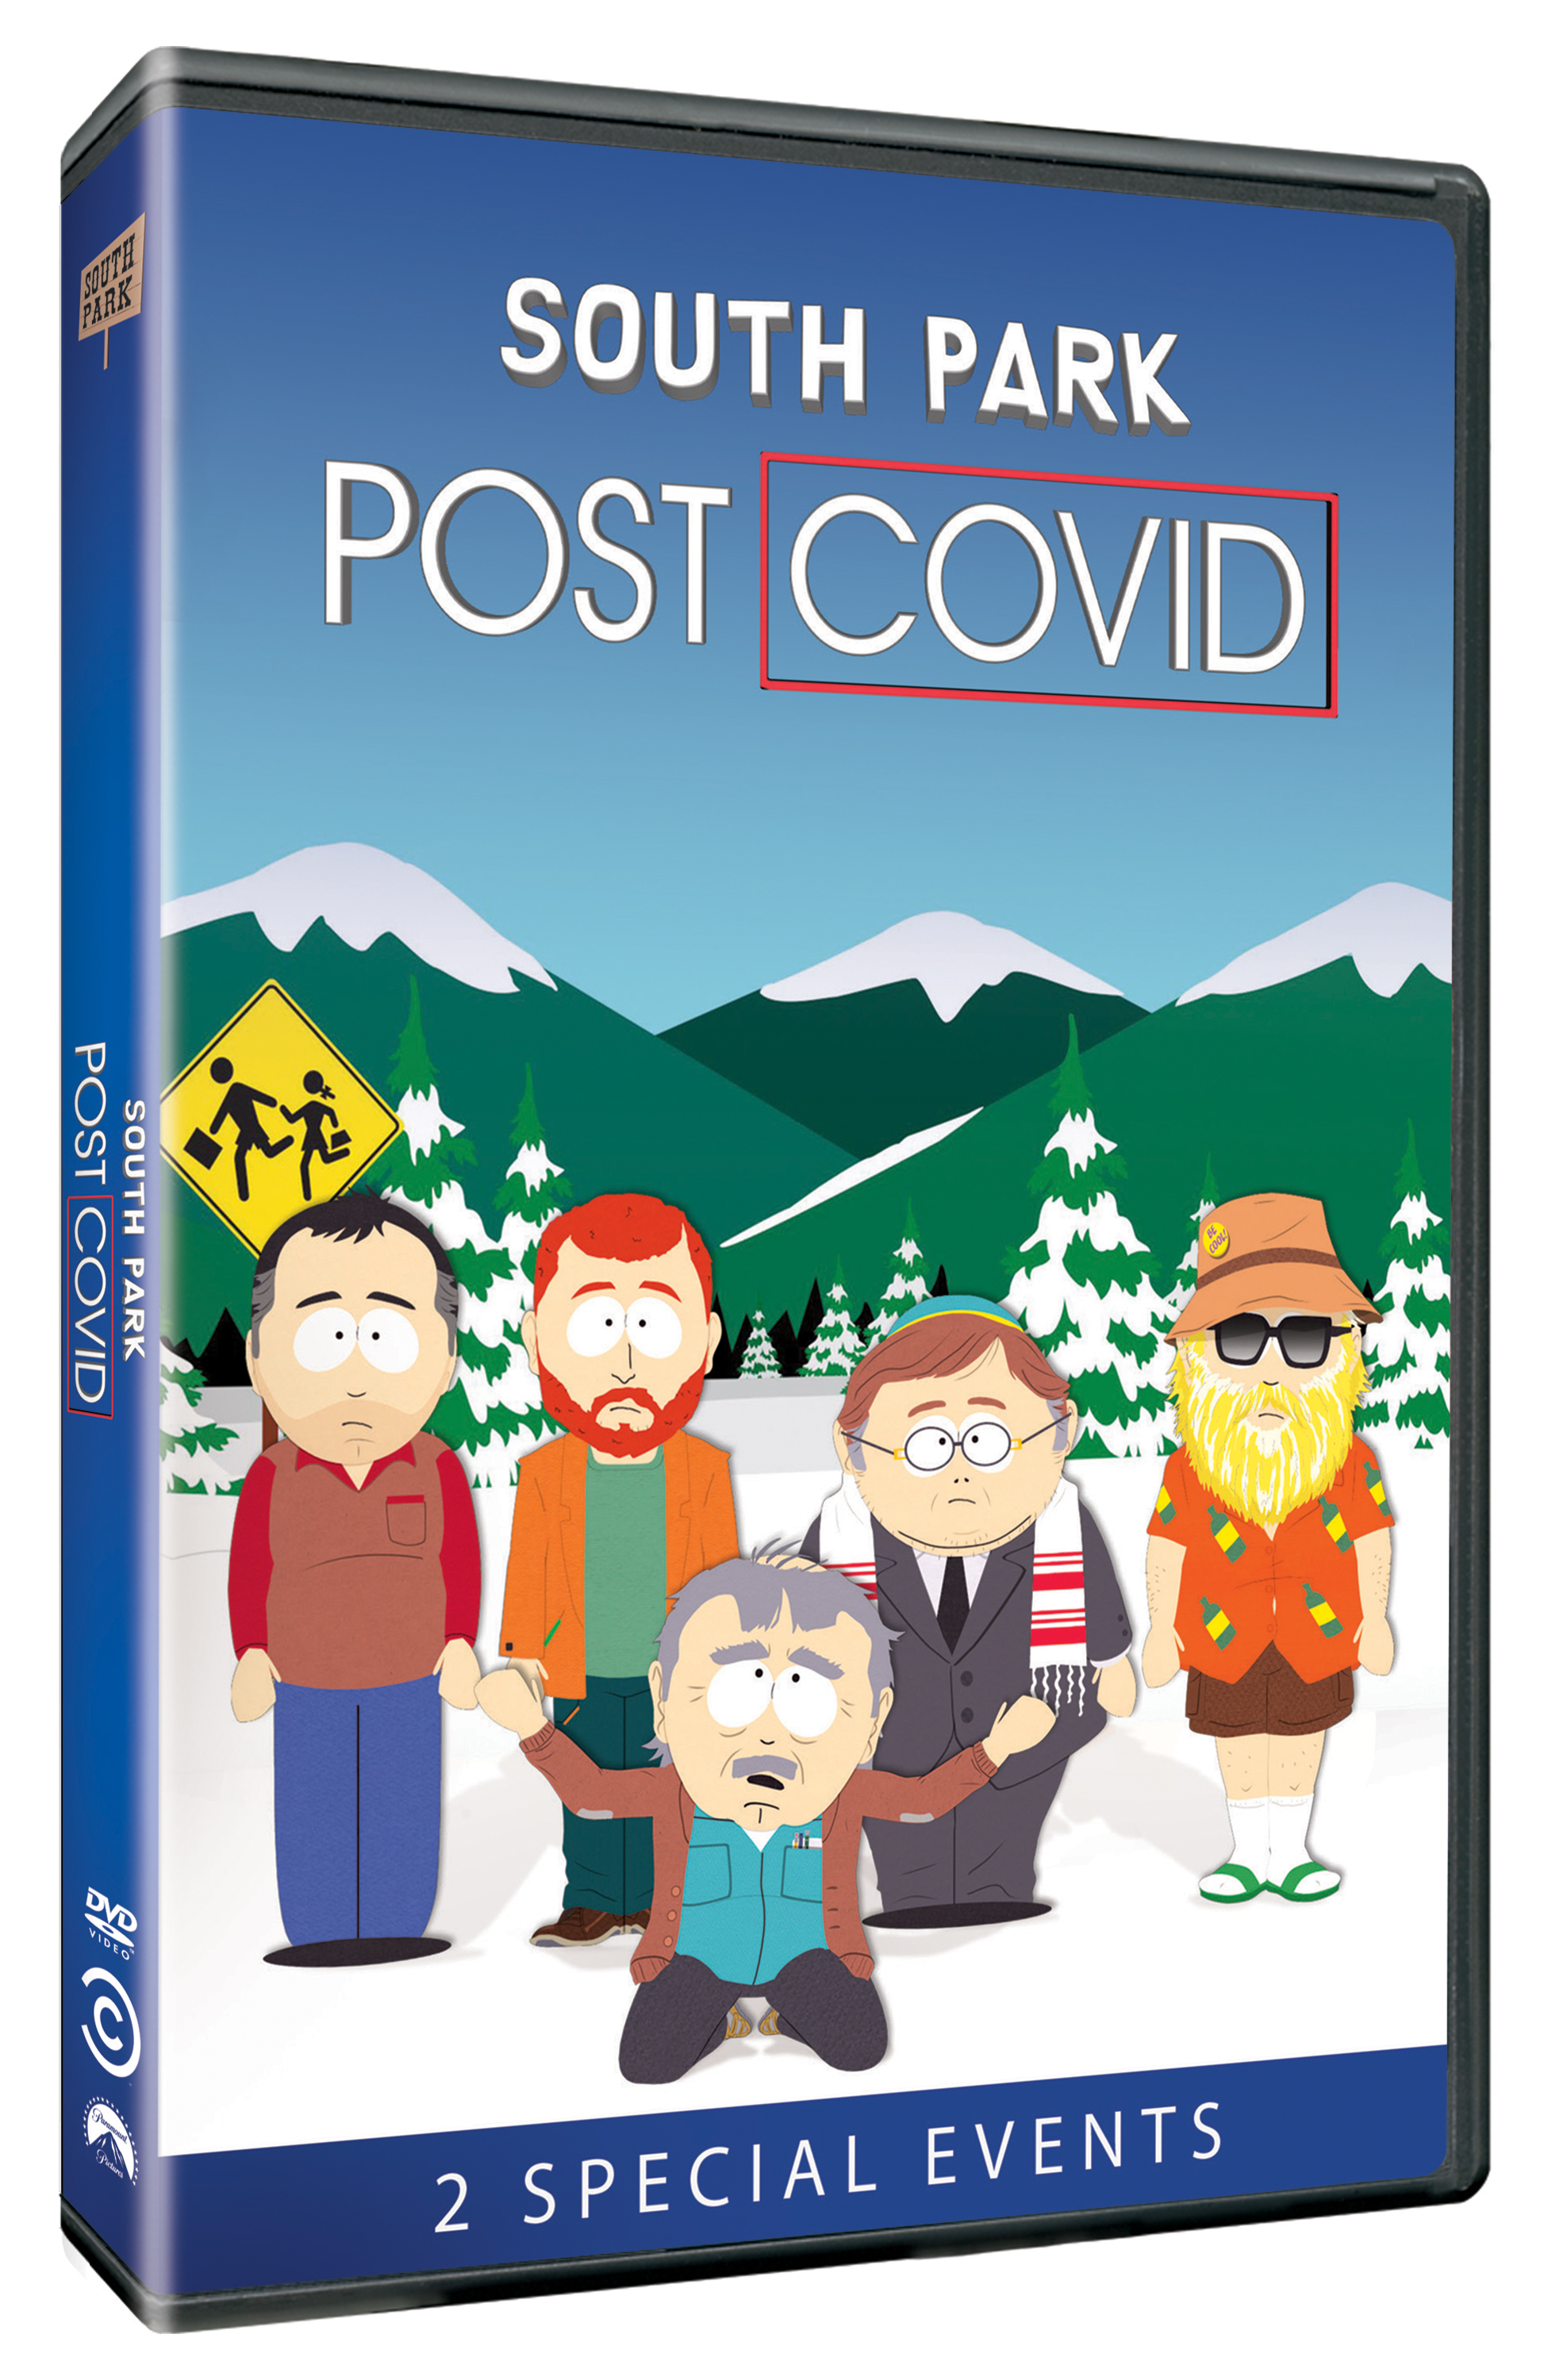 South Park: Post COVID - Best Buy